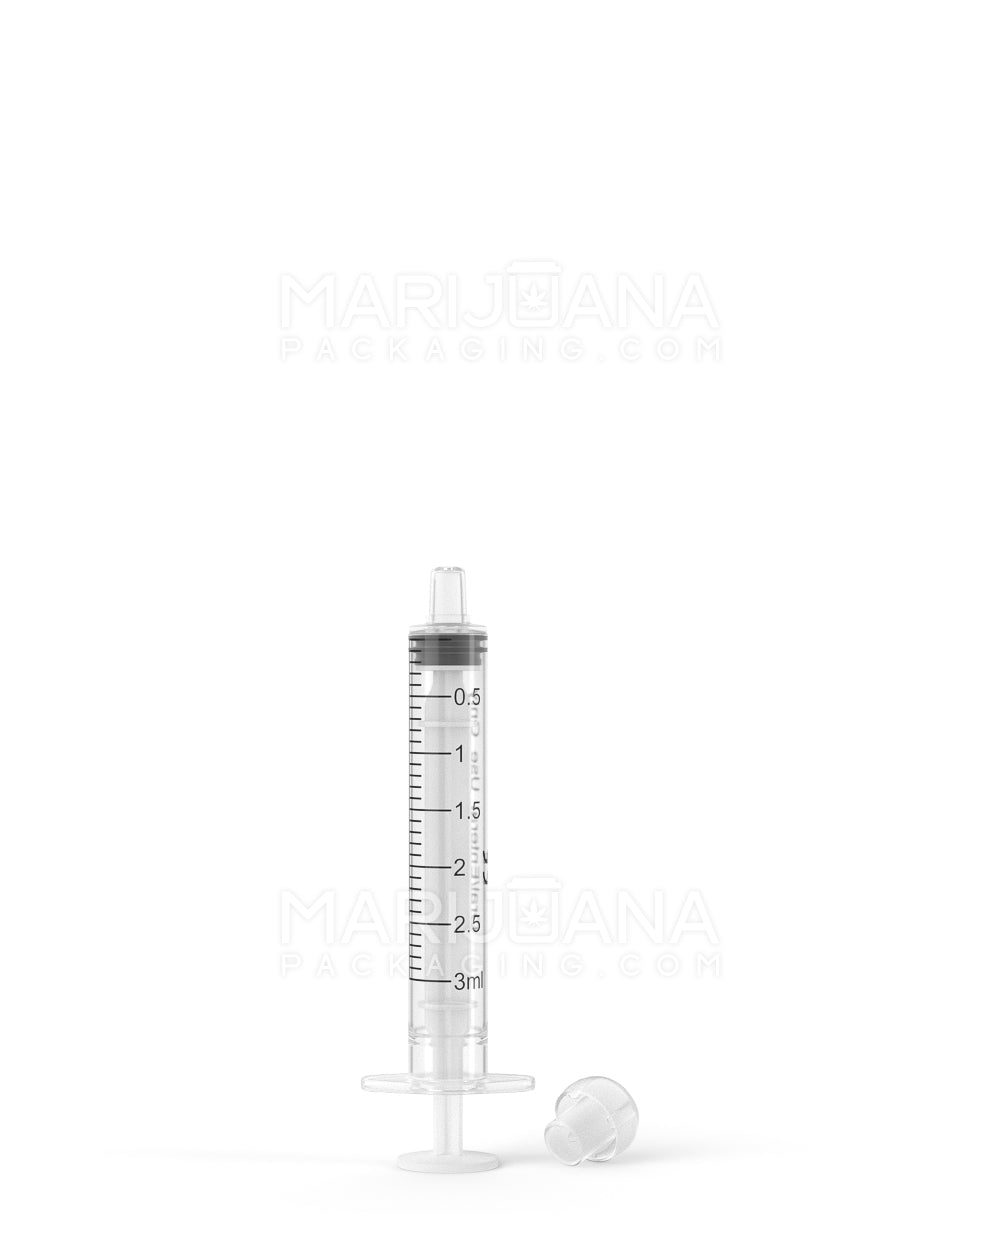 Plastic Oral Concentrate Syringes | 3mL - 0.5mL Increments - 100 Count - 9